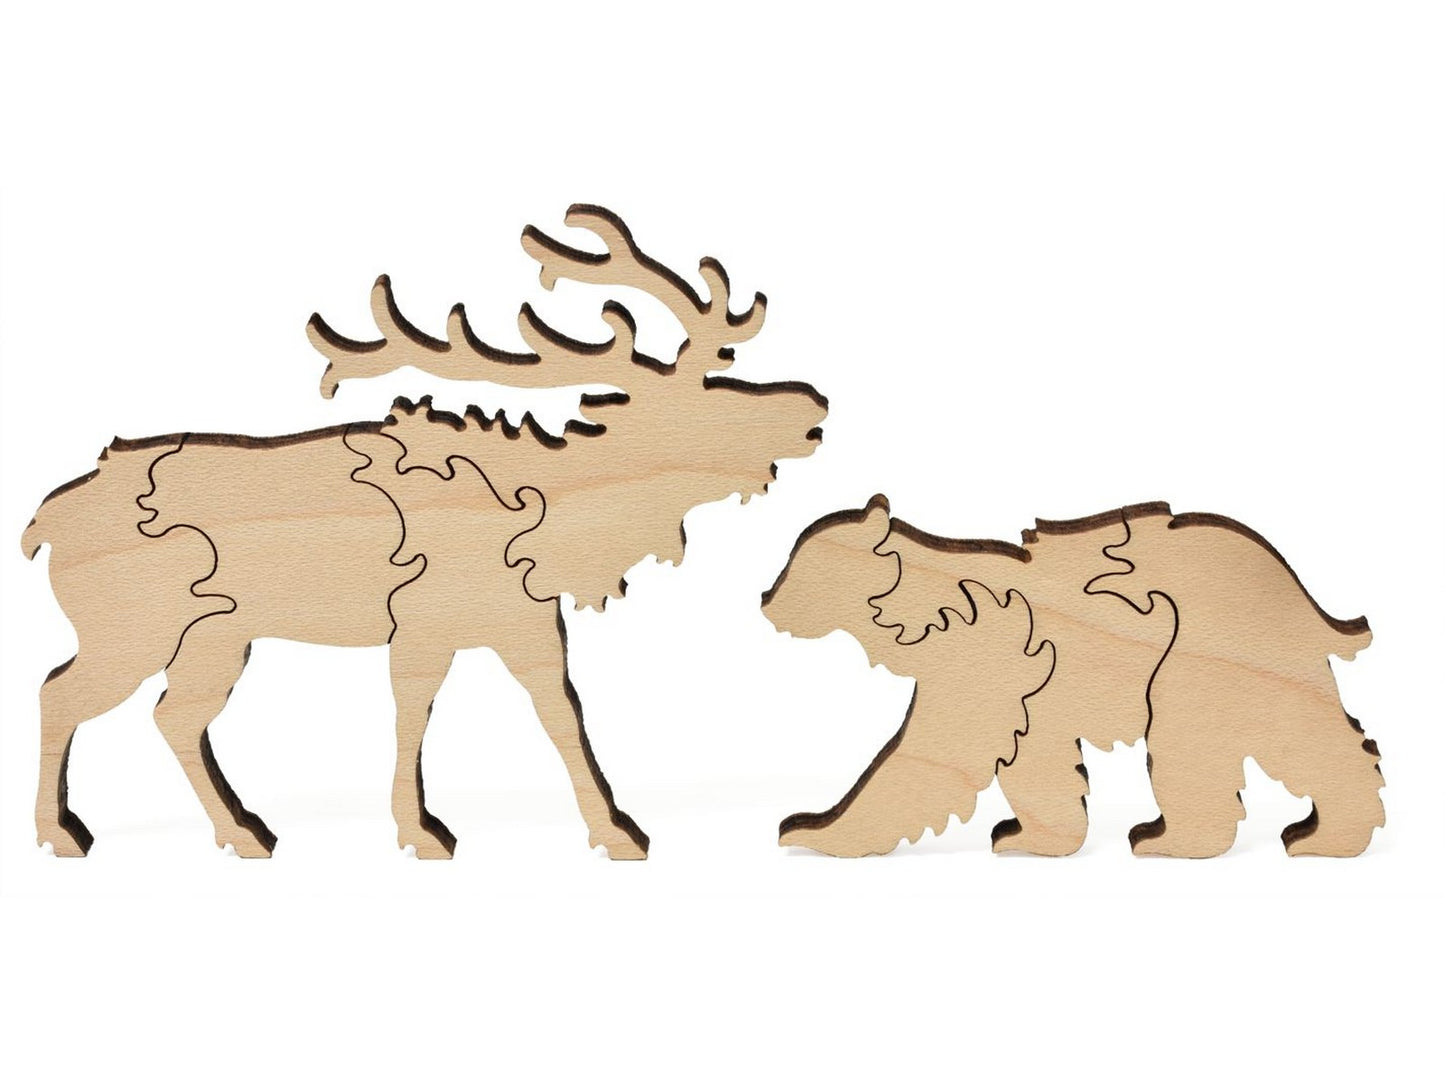 A closeup of pieces showing an elk and a bear from the puzzle, Gothic, Colorado.